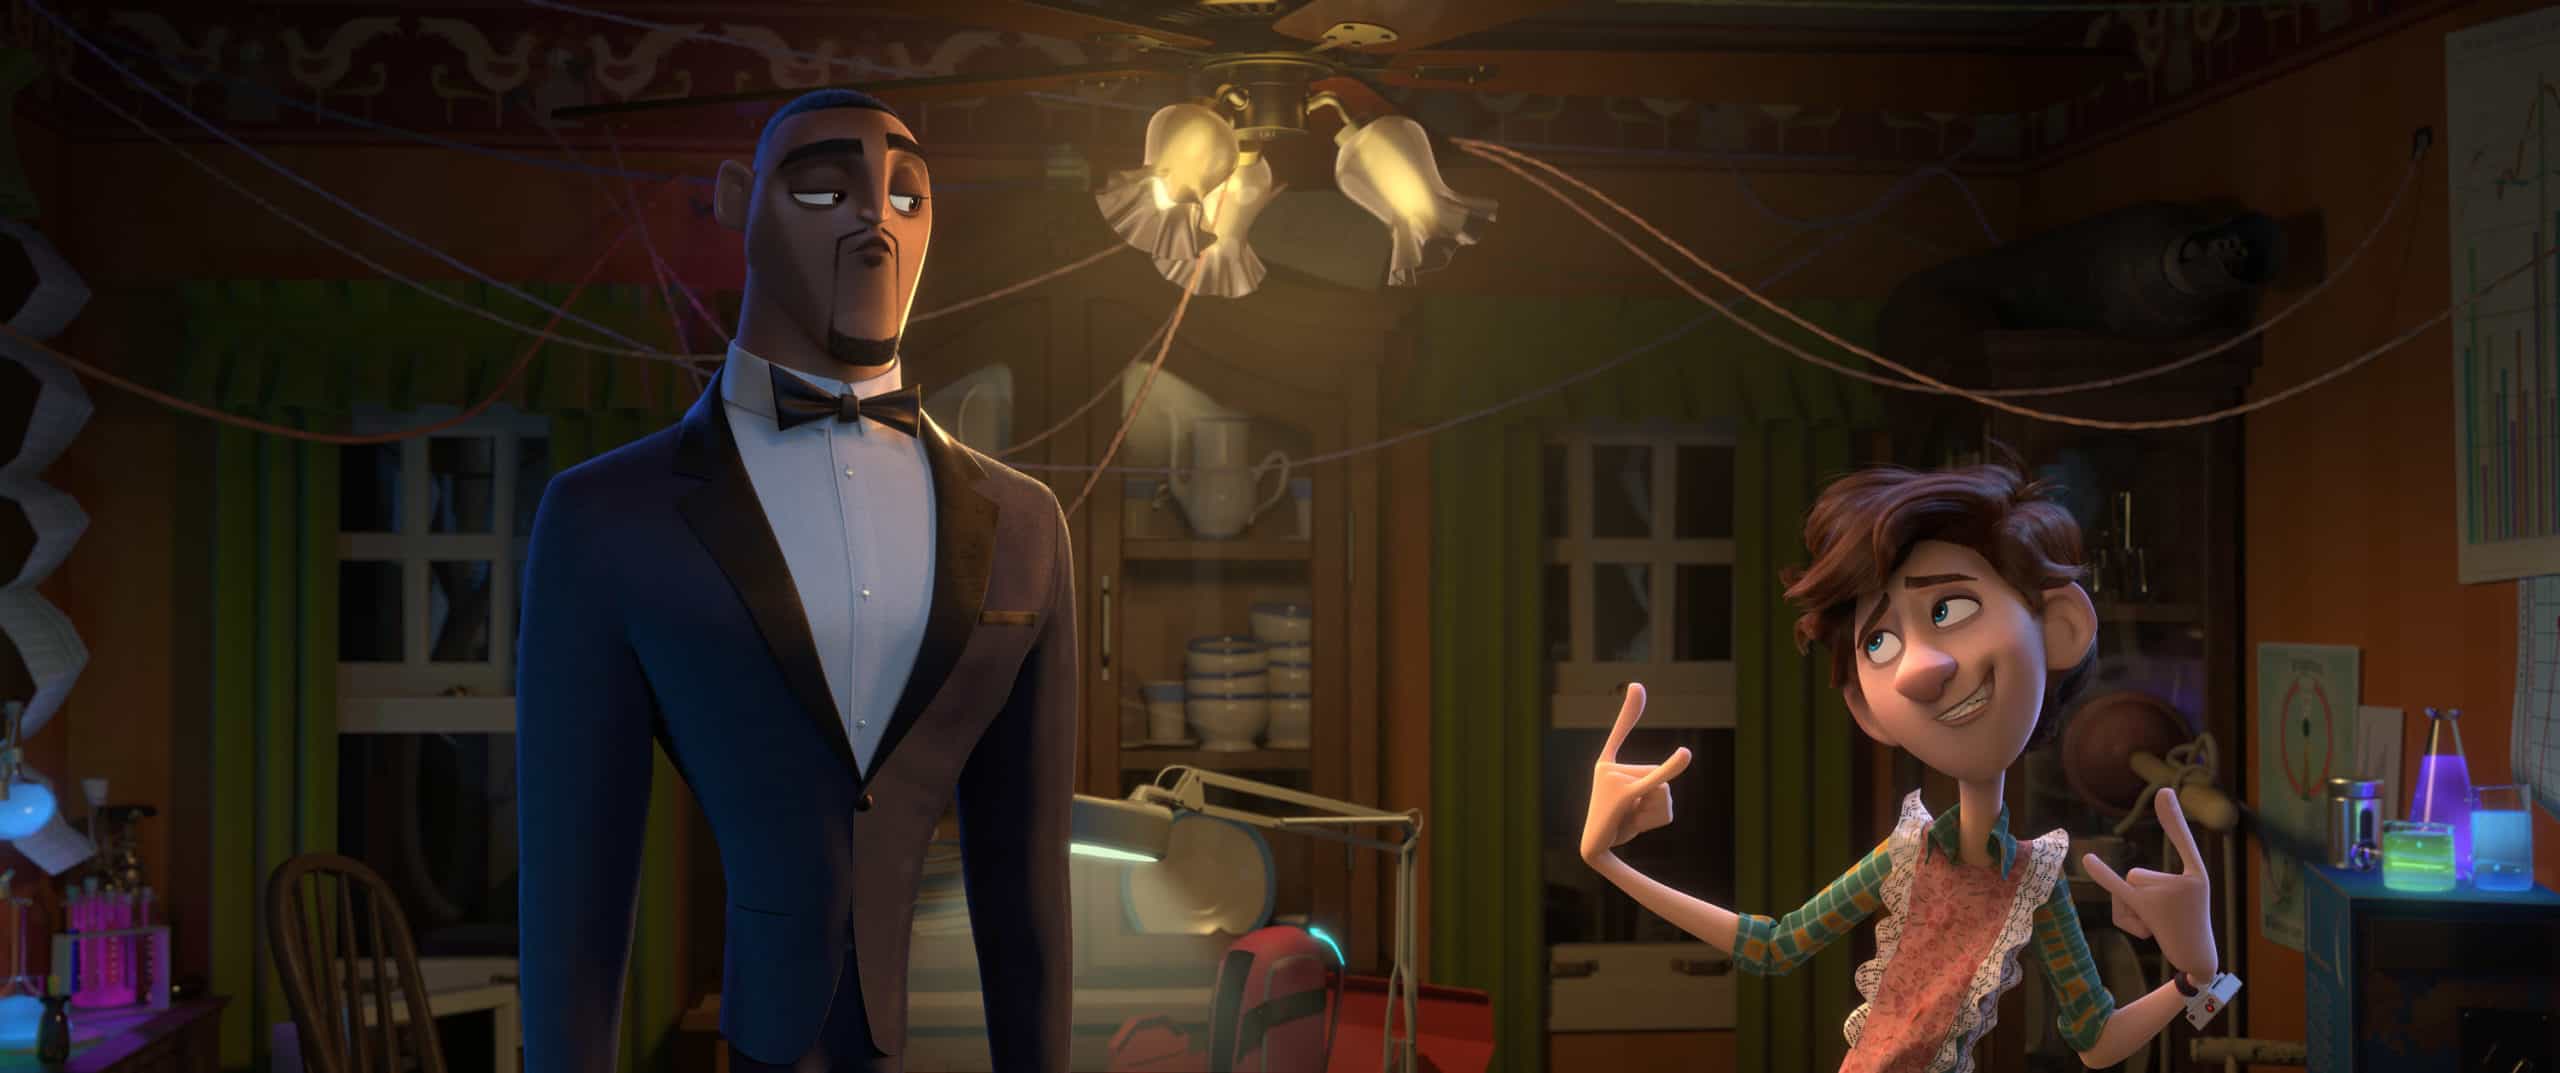 Will Smith and Tom Holland in Spies in Disguise